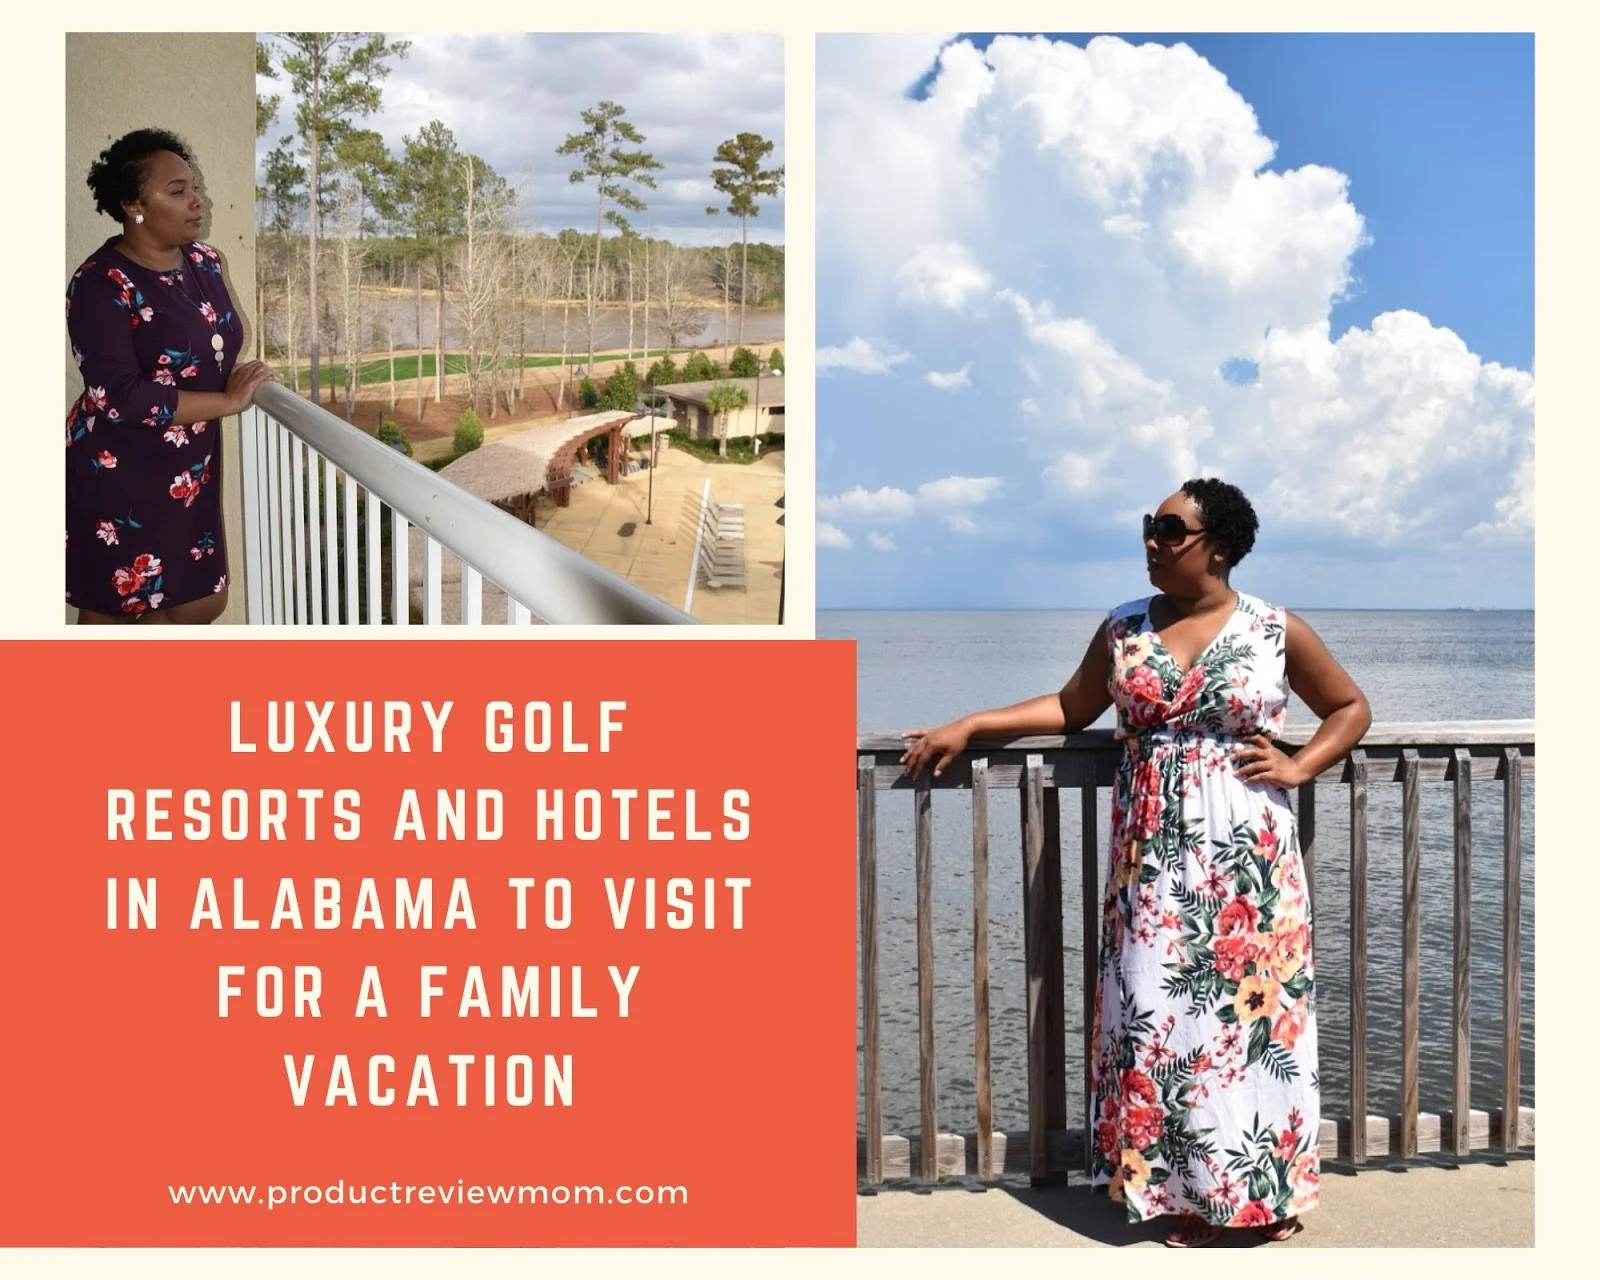 Luxury Golf Resorts and Hotels in Alabama to Visit for a Family Vacation